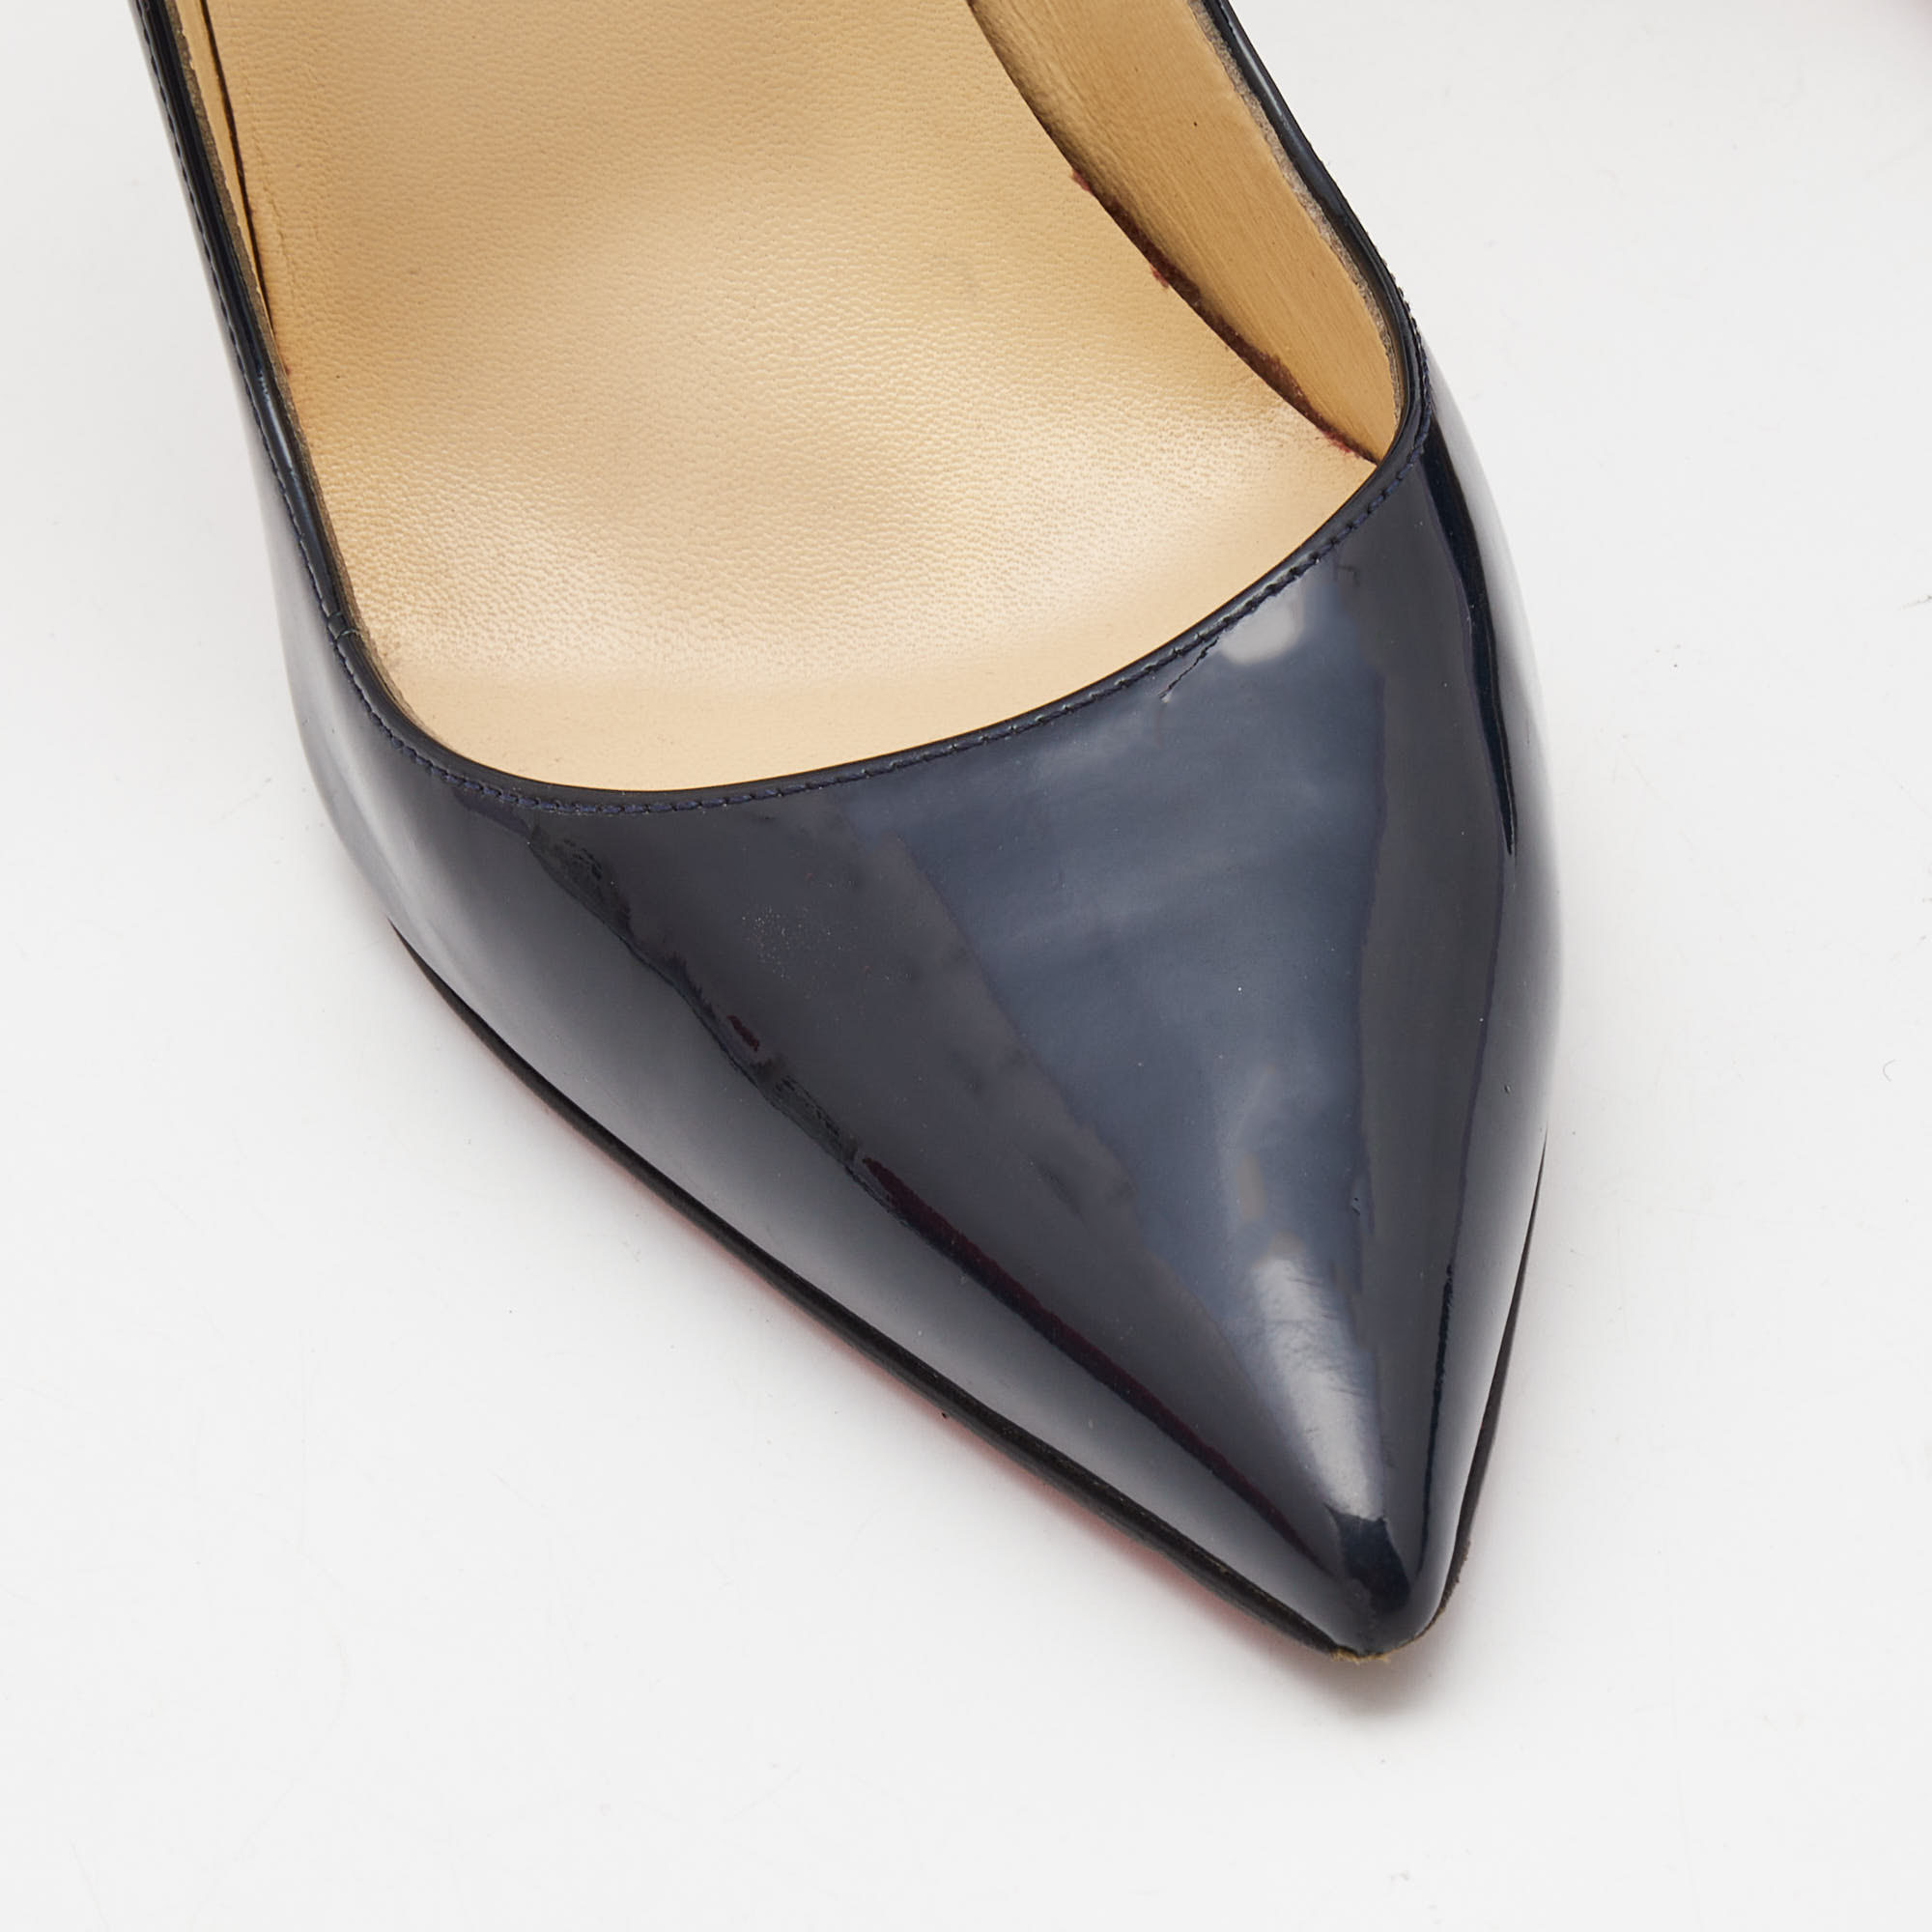 Christian Louboutin Navy Blue Patent Leather So Kate Pumps Size 38